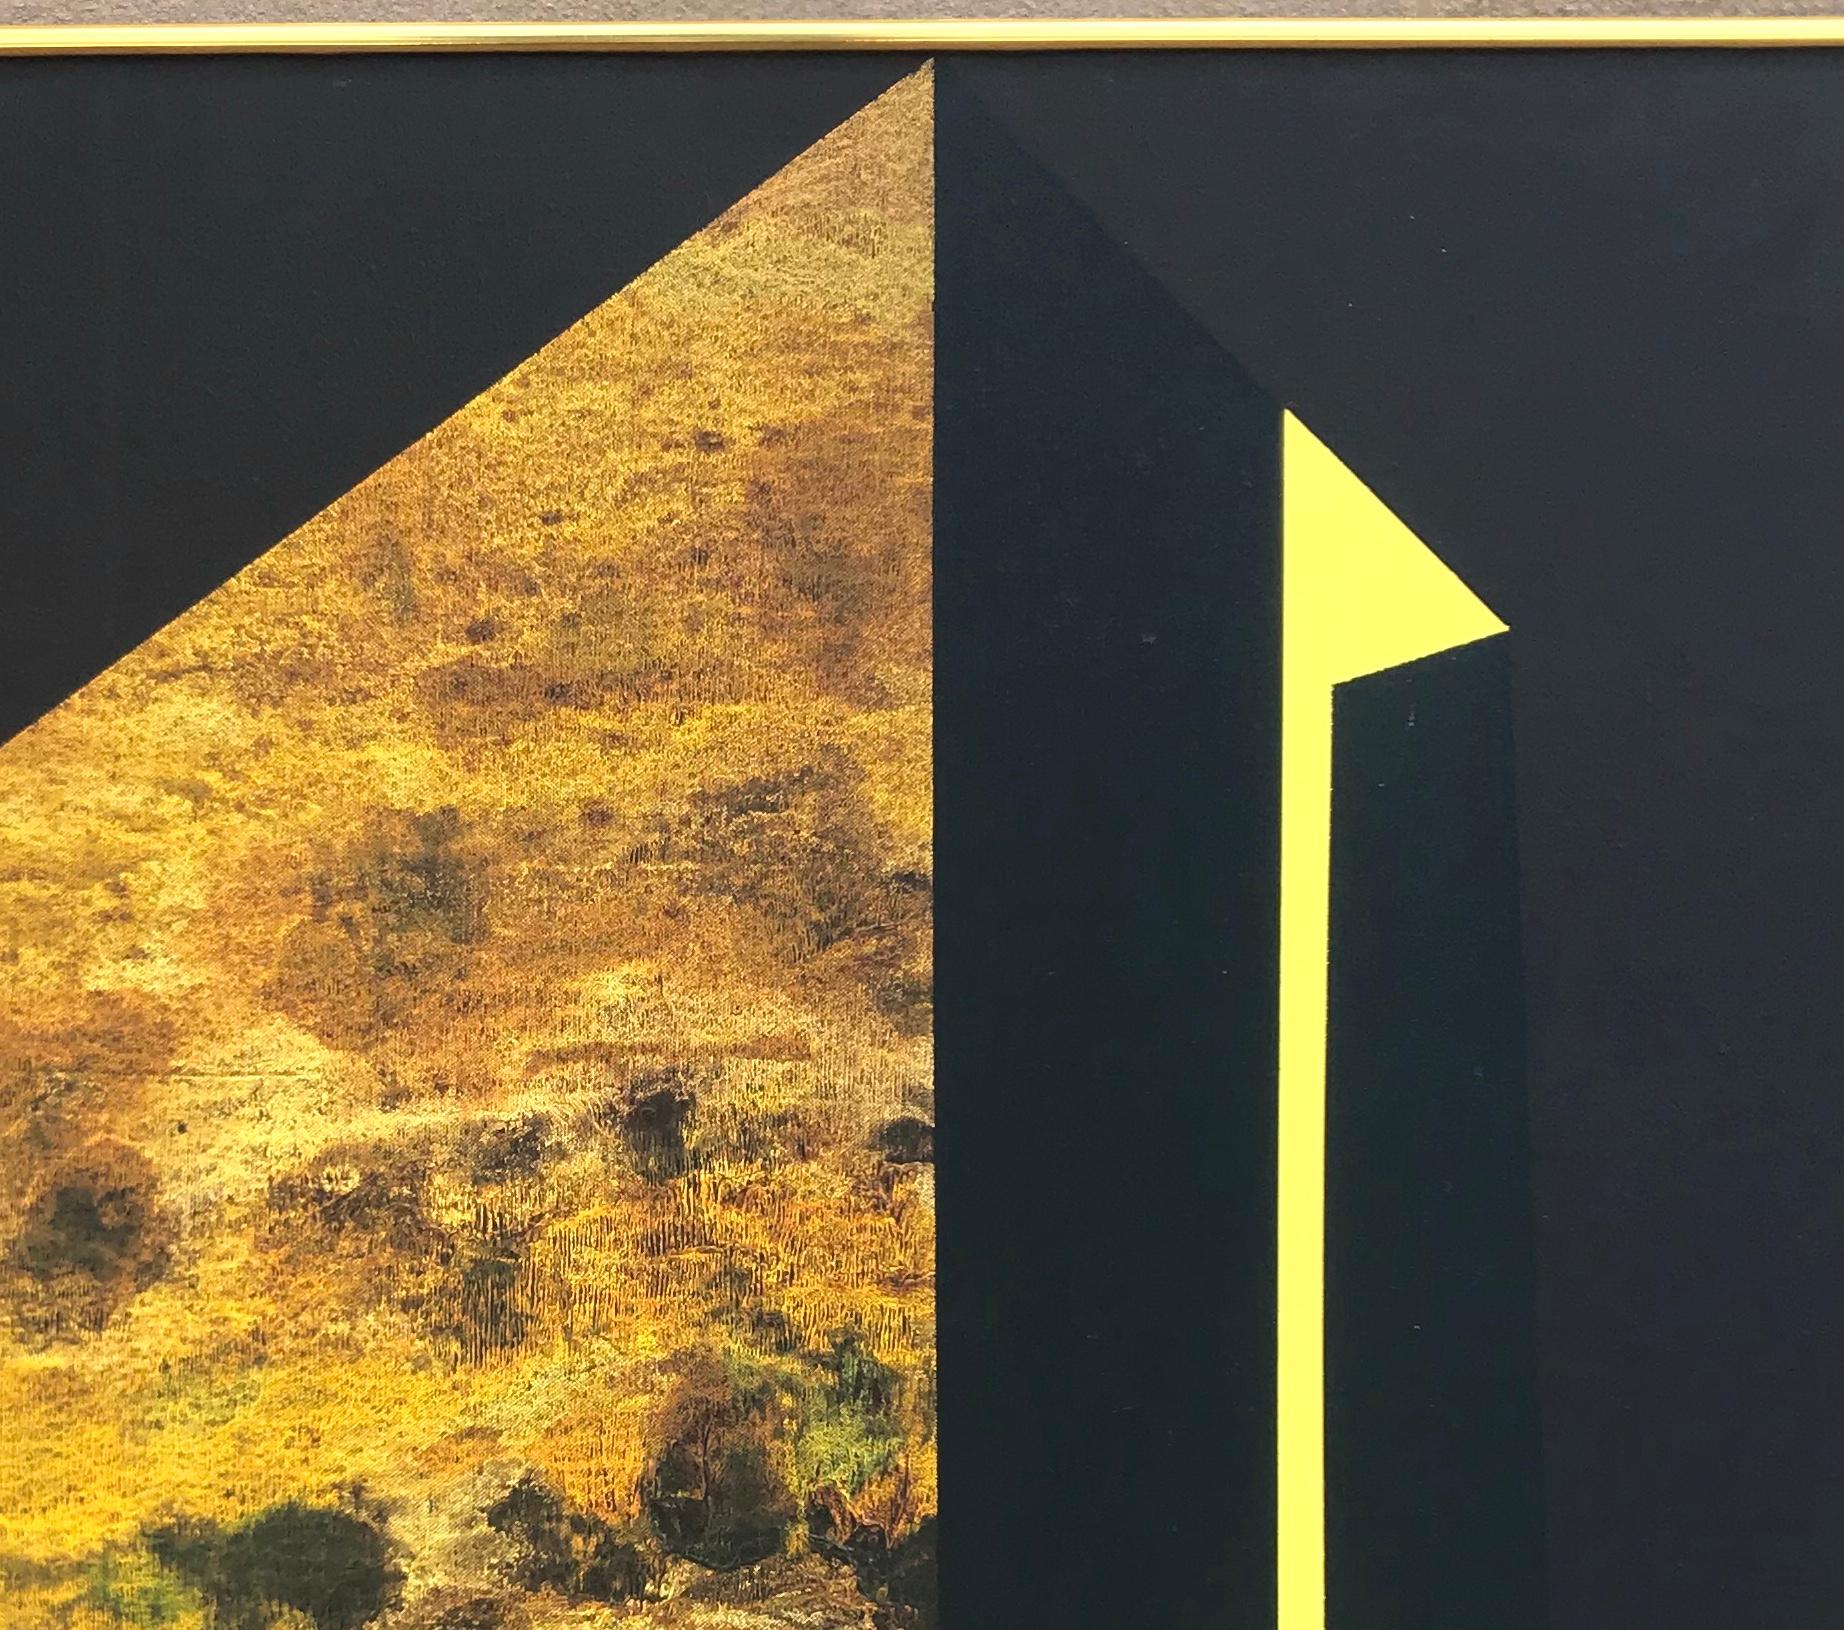 Wonderful large abstract painting by important Washington Color School artist James Twitty (1916-1994). This piece is entitled “Benchmark IV” and was originally sold through the noted Washington DC Osuna Gallery, as evidenced by the gallery label on